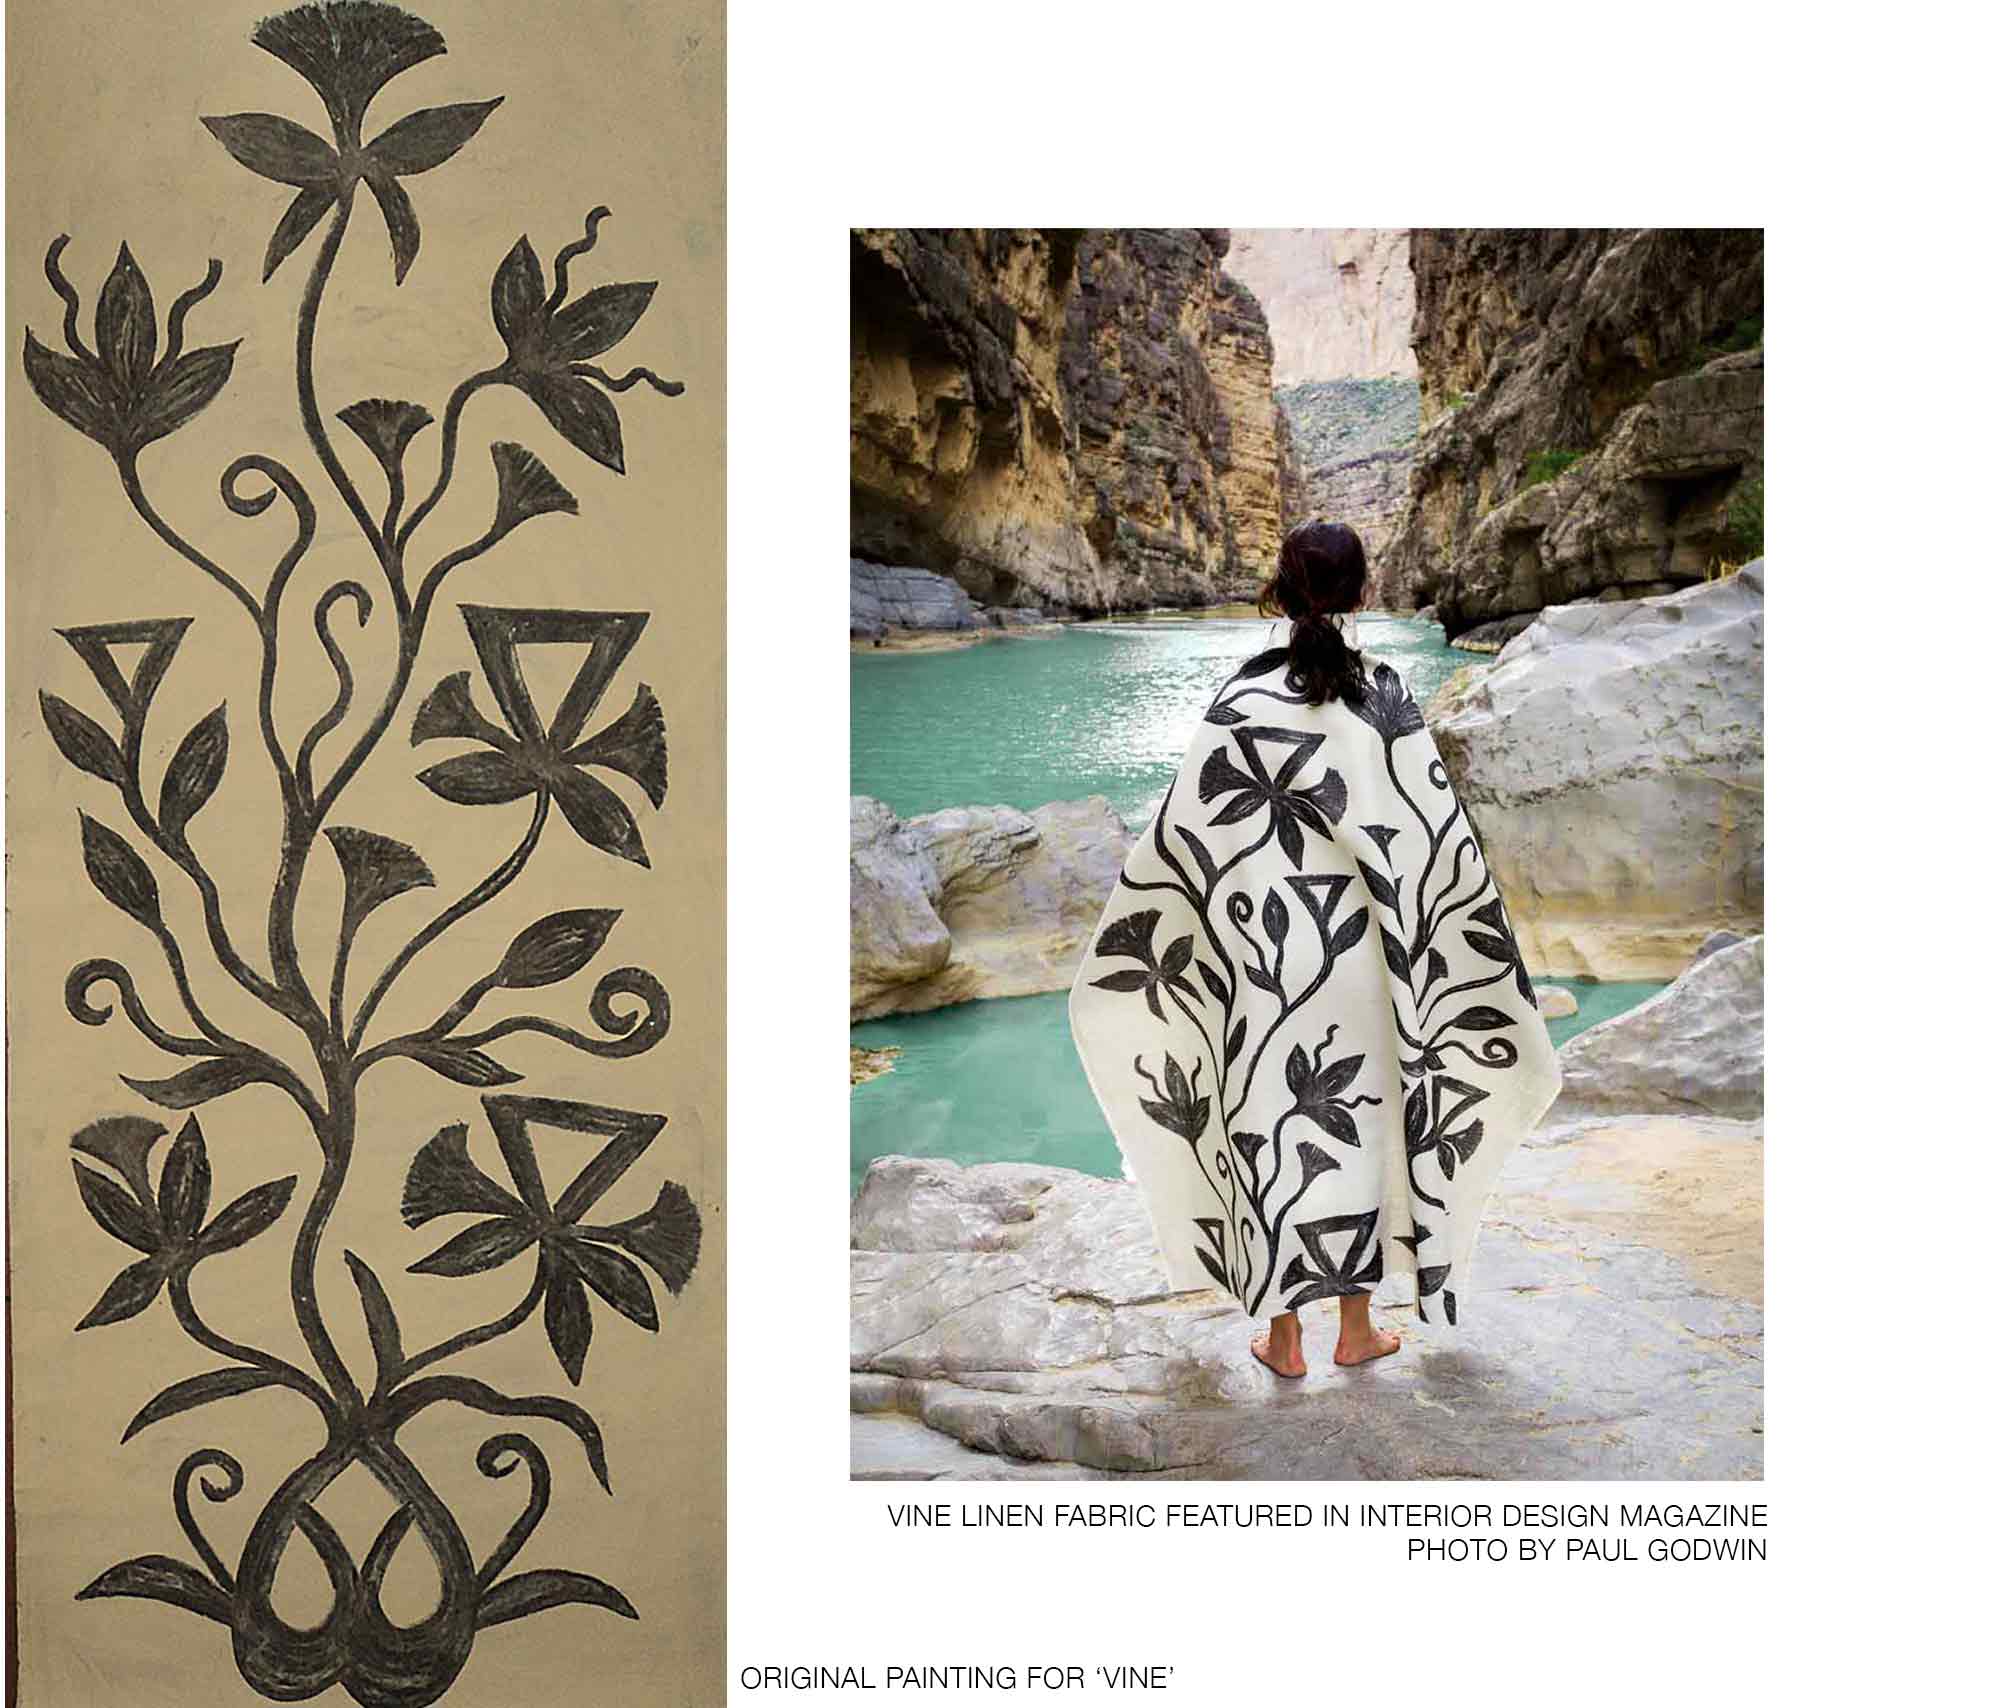 original commissioned vine mud painting from the womens collective TWAC and khovar collection, vine linen fabric featured in Interior Design Magazine. photo by paul godwin.